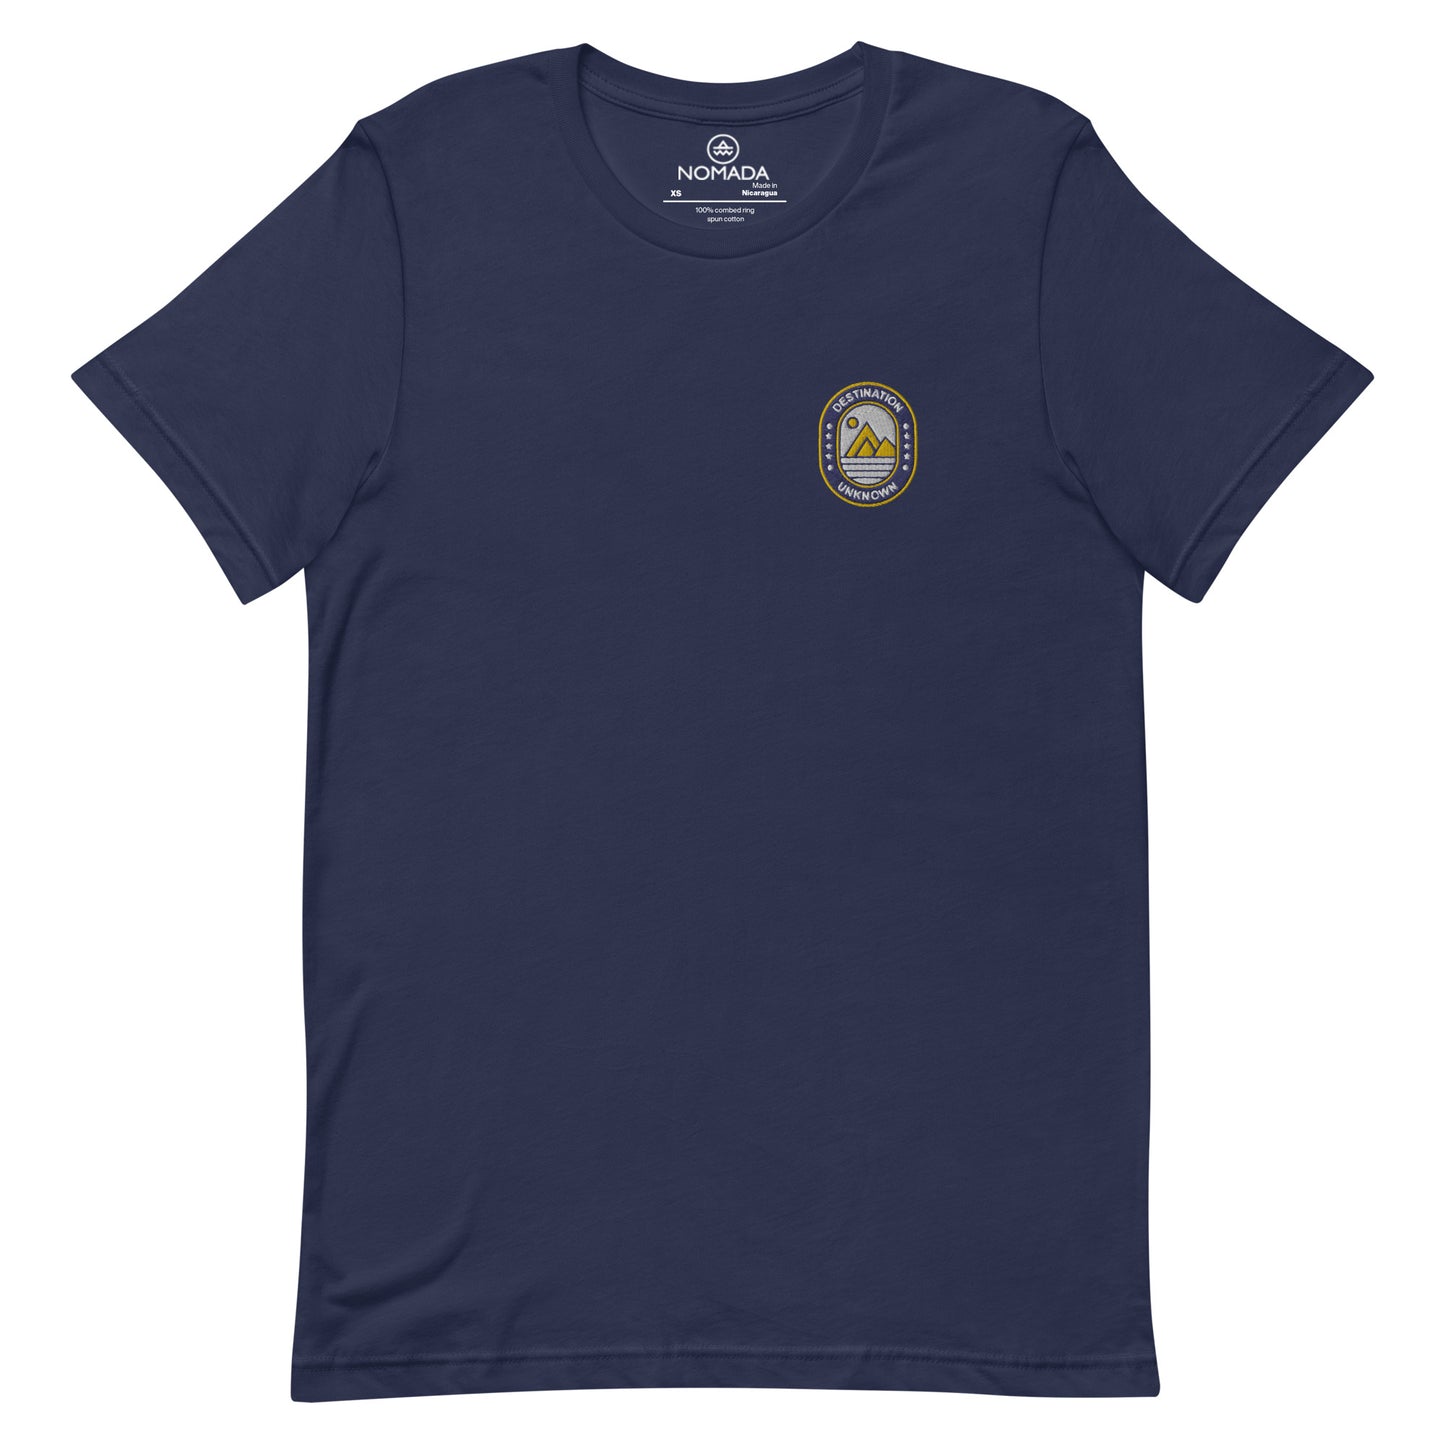 NOMADA Mountain & Sun Camper Patch embroidered T-shirt, Navy Blue color shirt